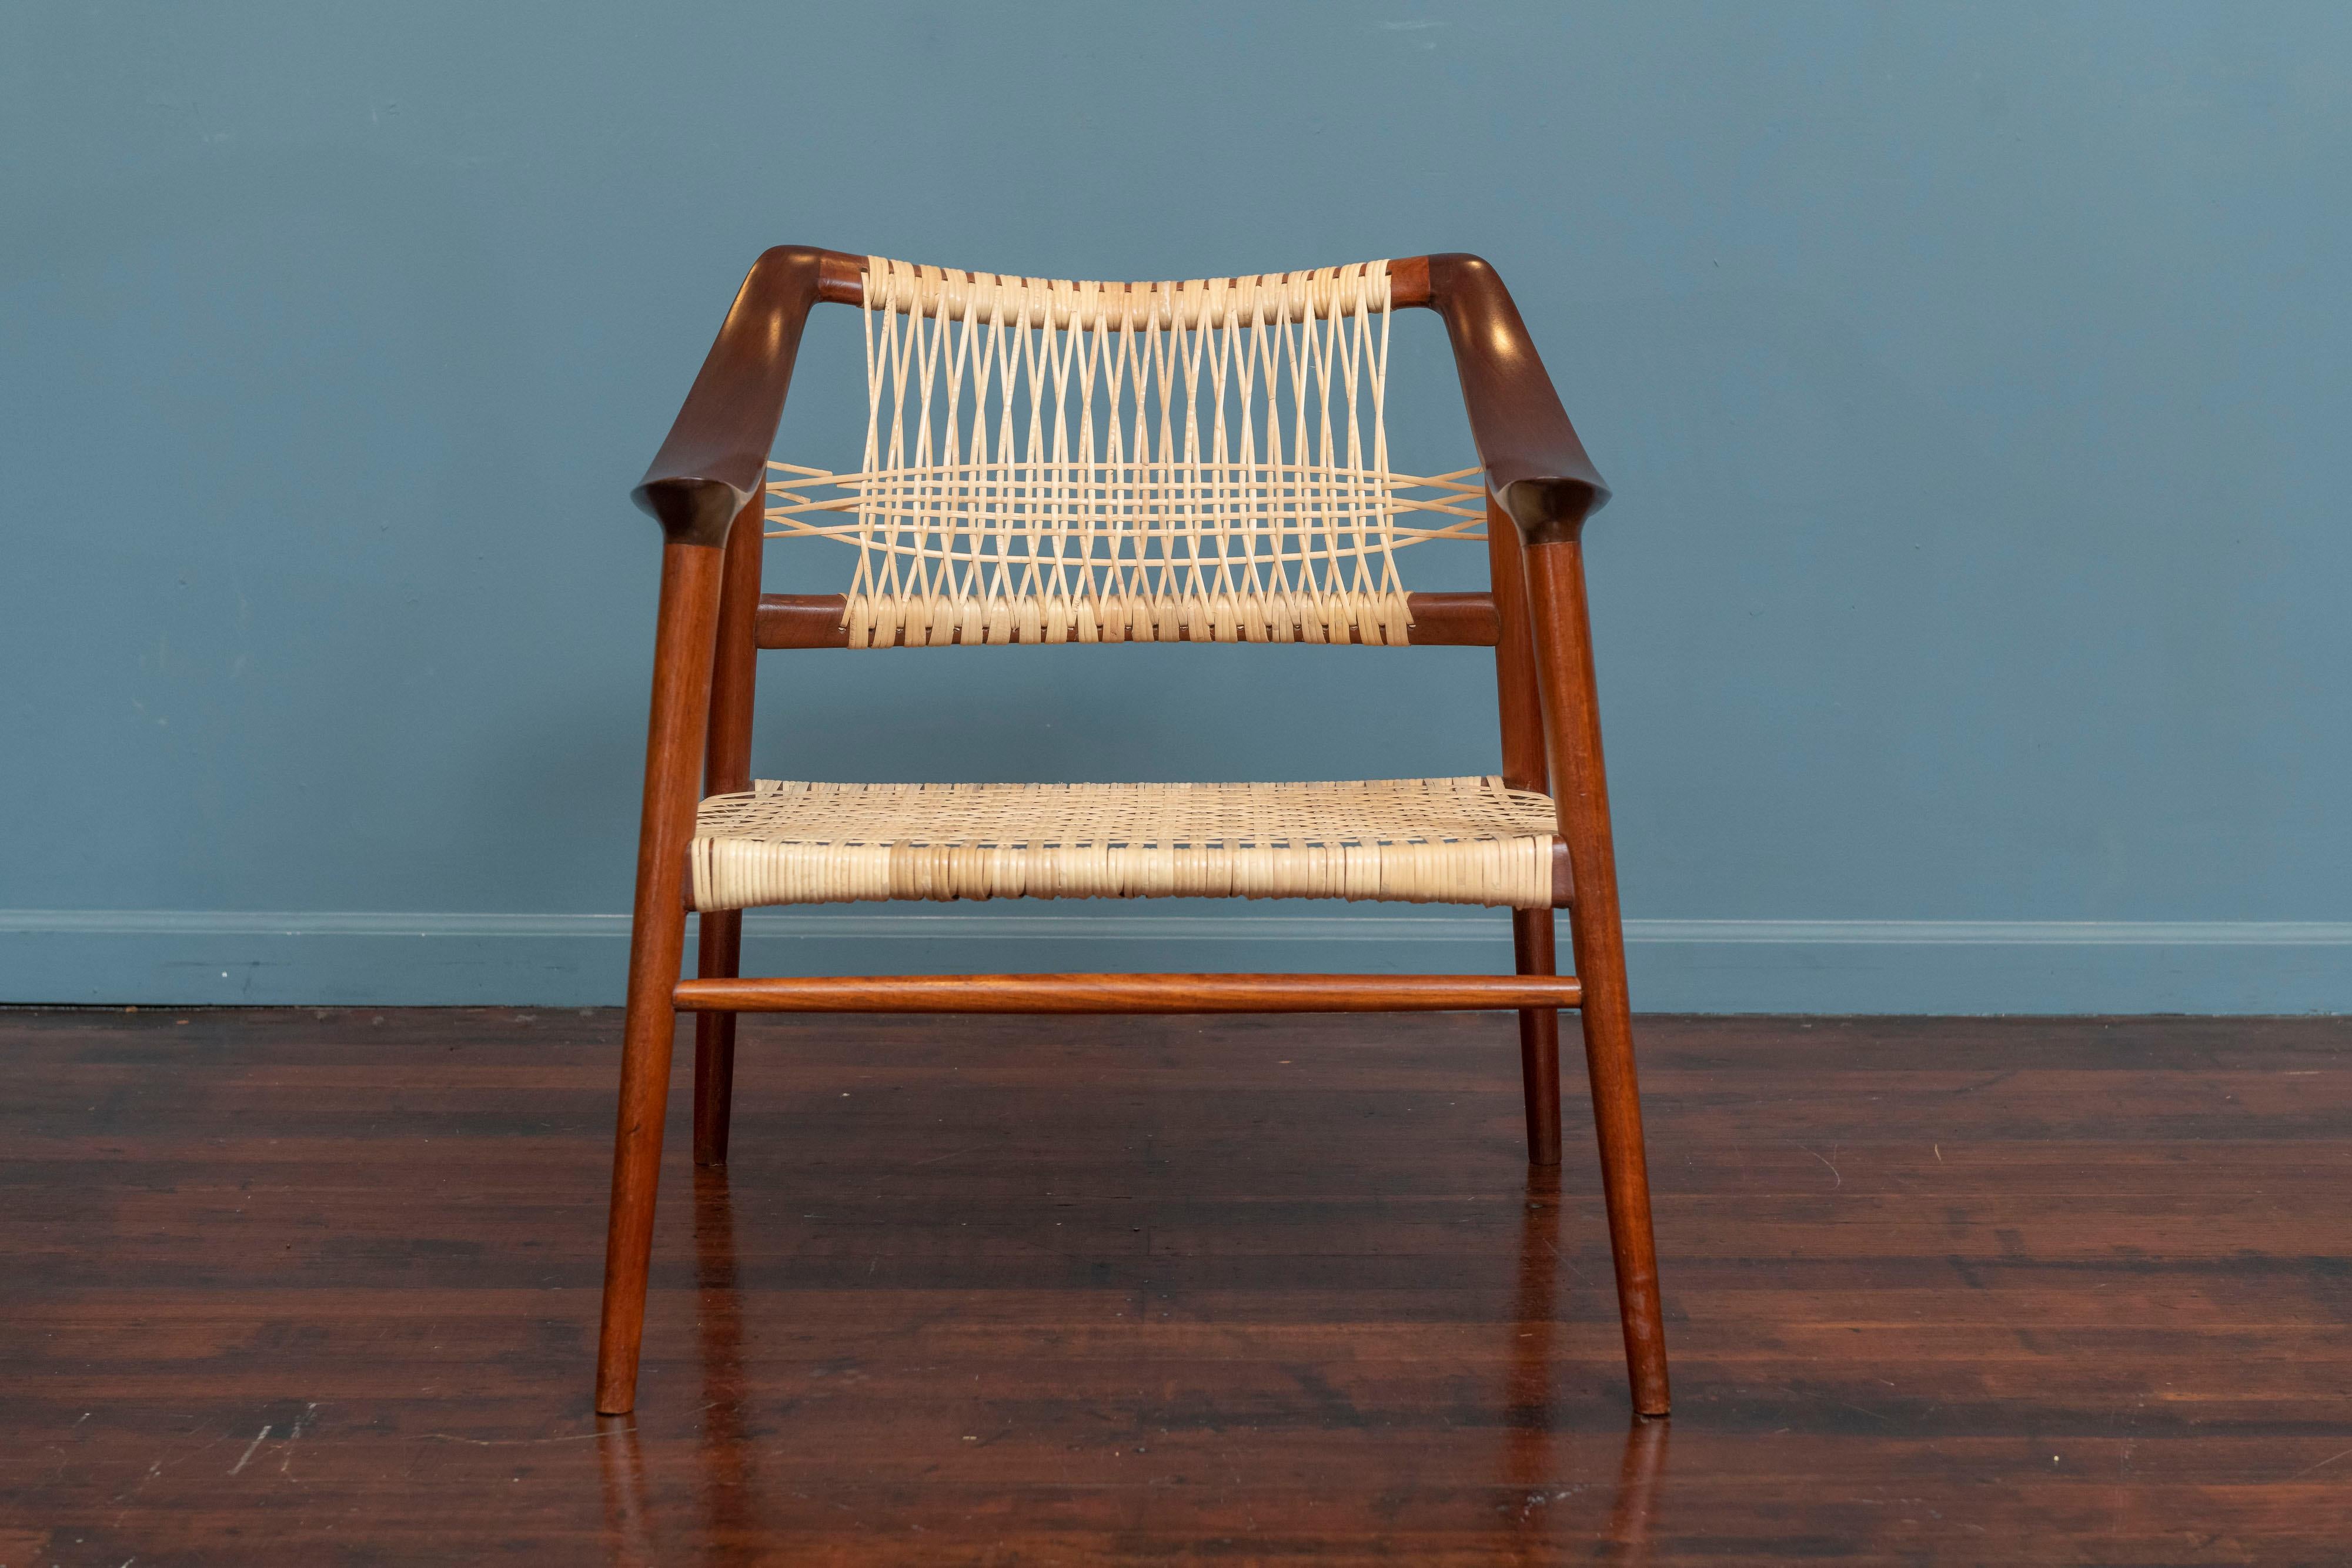 Rolf Rastad & Adolf Relling “Bambi” Cane armchair, Denmark. Beautiful example of this iconic chair design sophisticated in its simplicity yet very comfortable. The chair has just been cleaned and waxed with newer cane weaving, ready to be installed